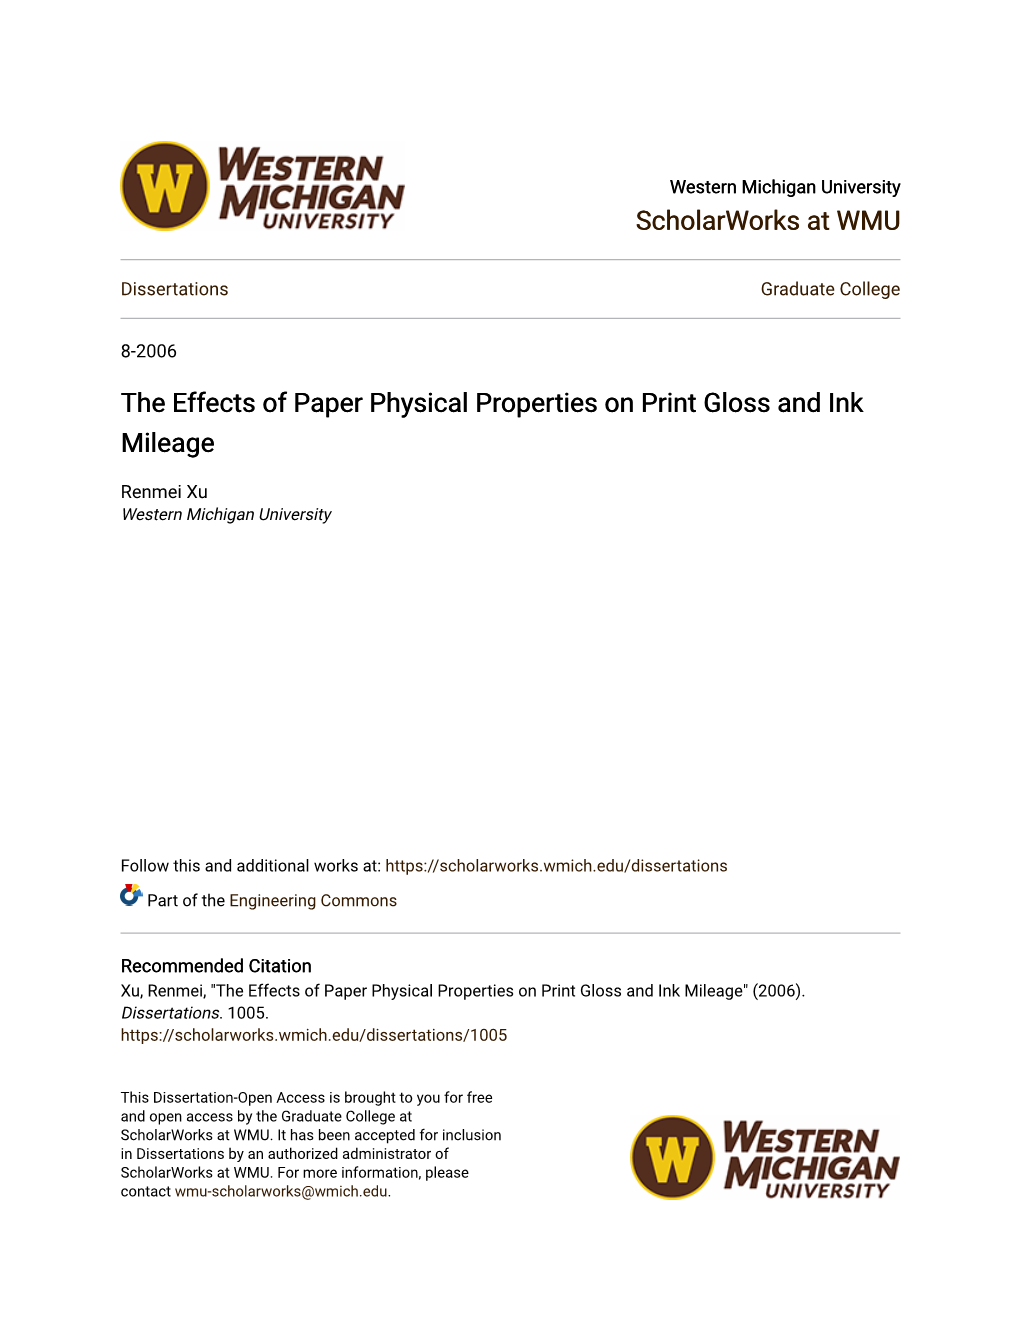 The Effects of Paper Physical Properties on Print Gloss and Ink Mileage